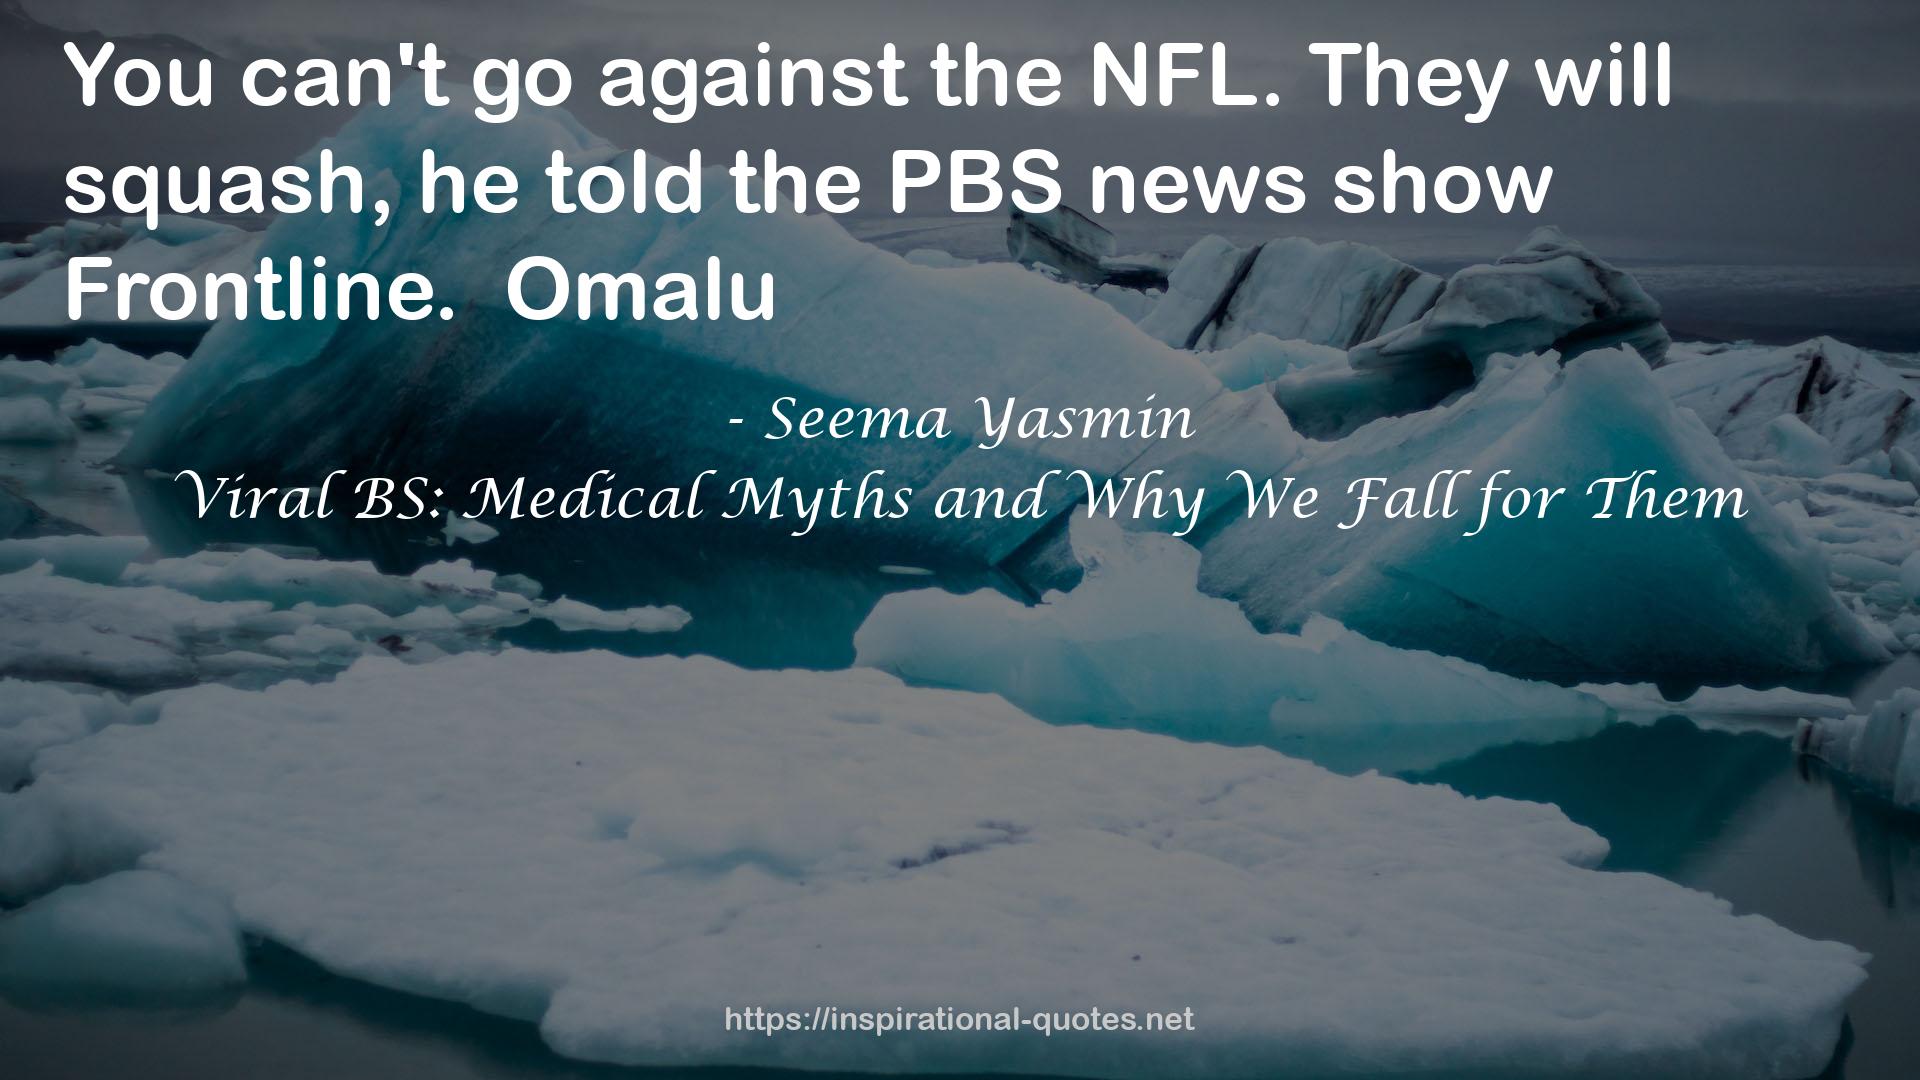 Viral BS: Medical Myths and Why We Fall for Them QUOTES